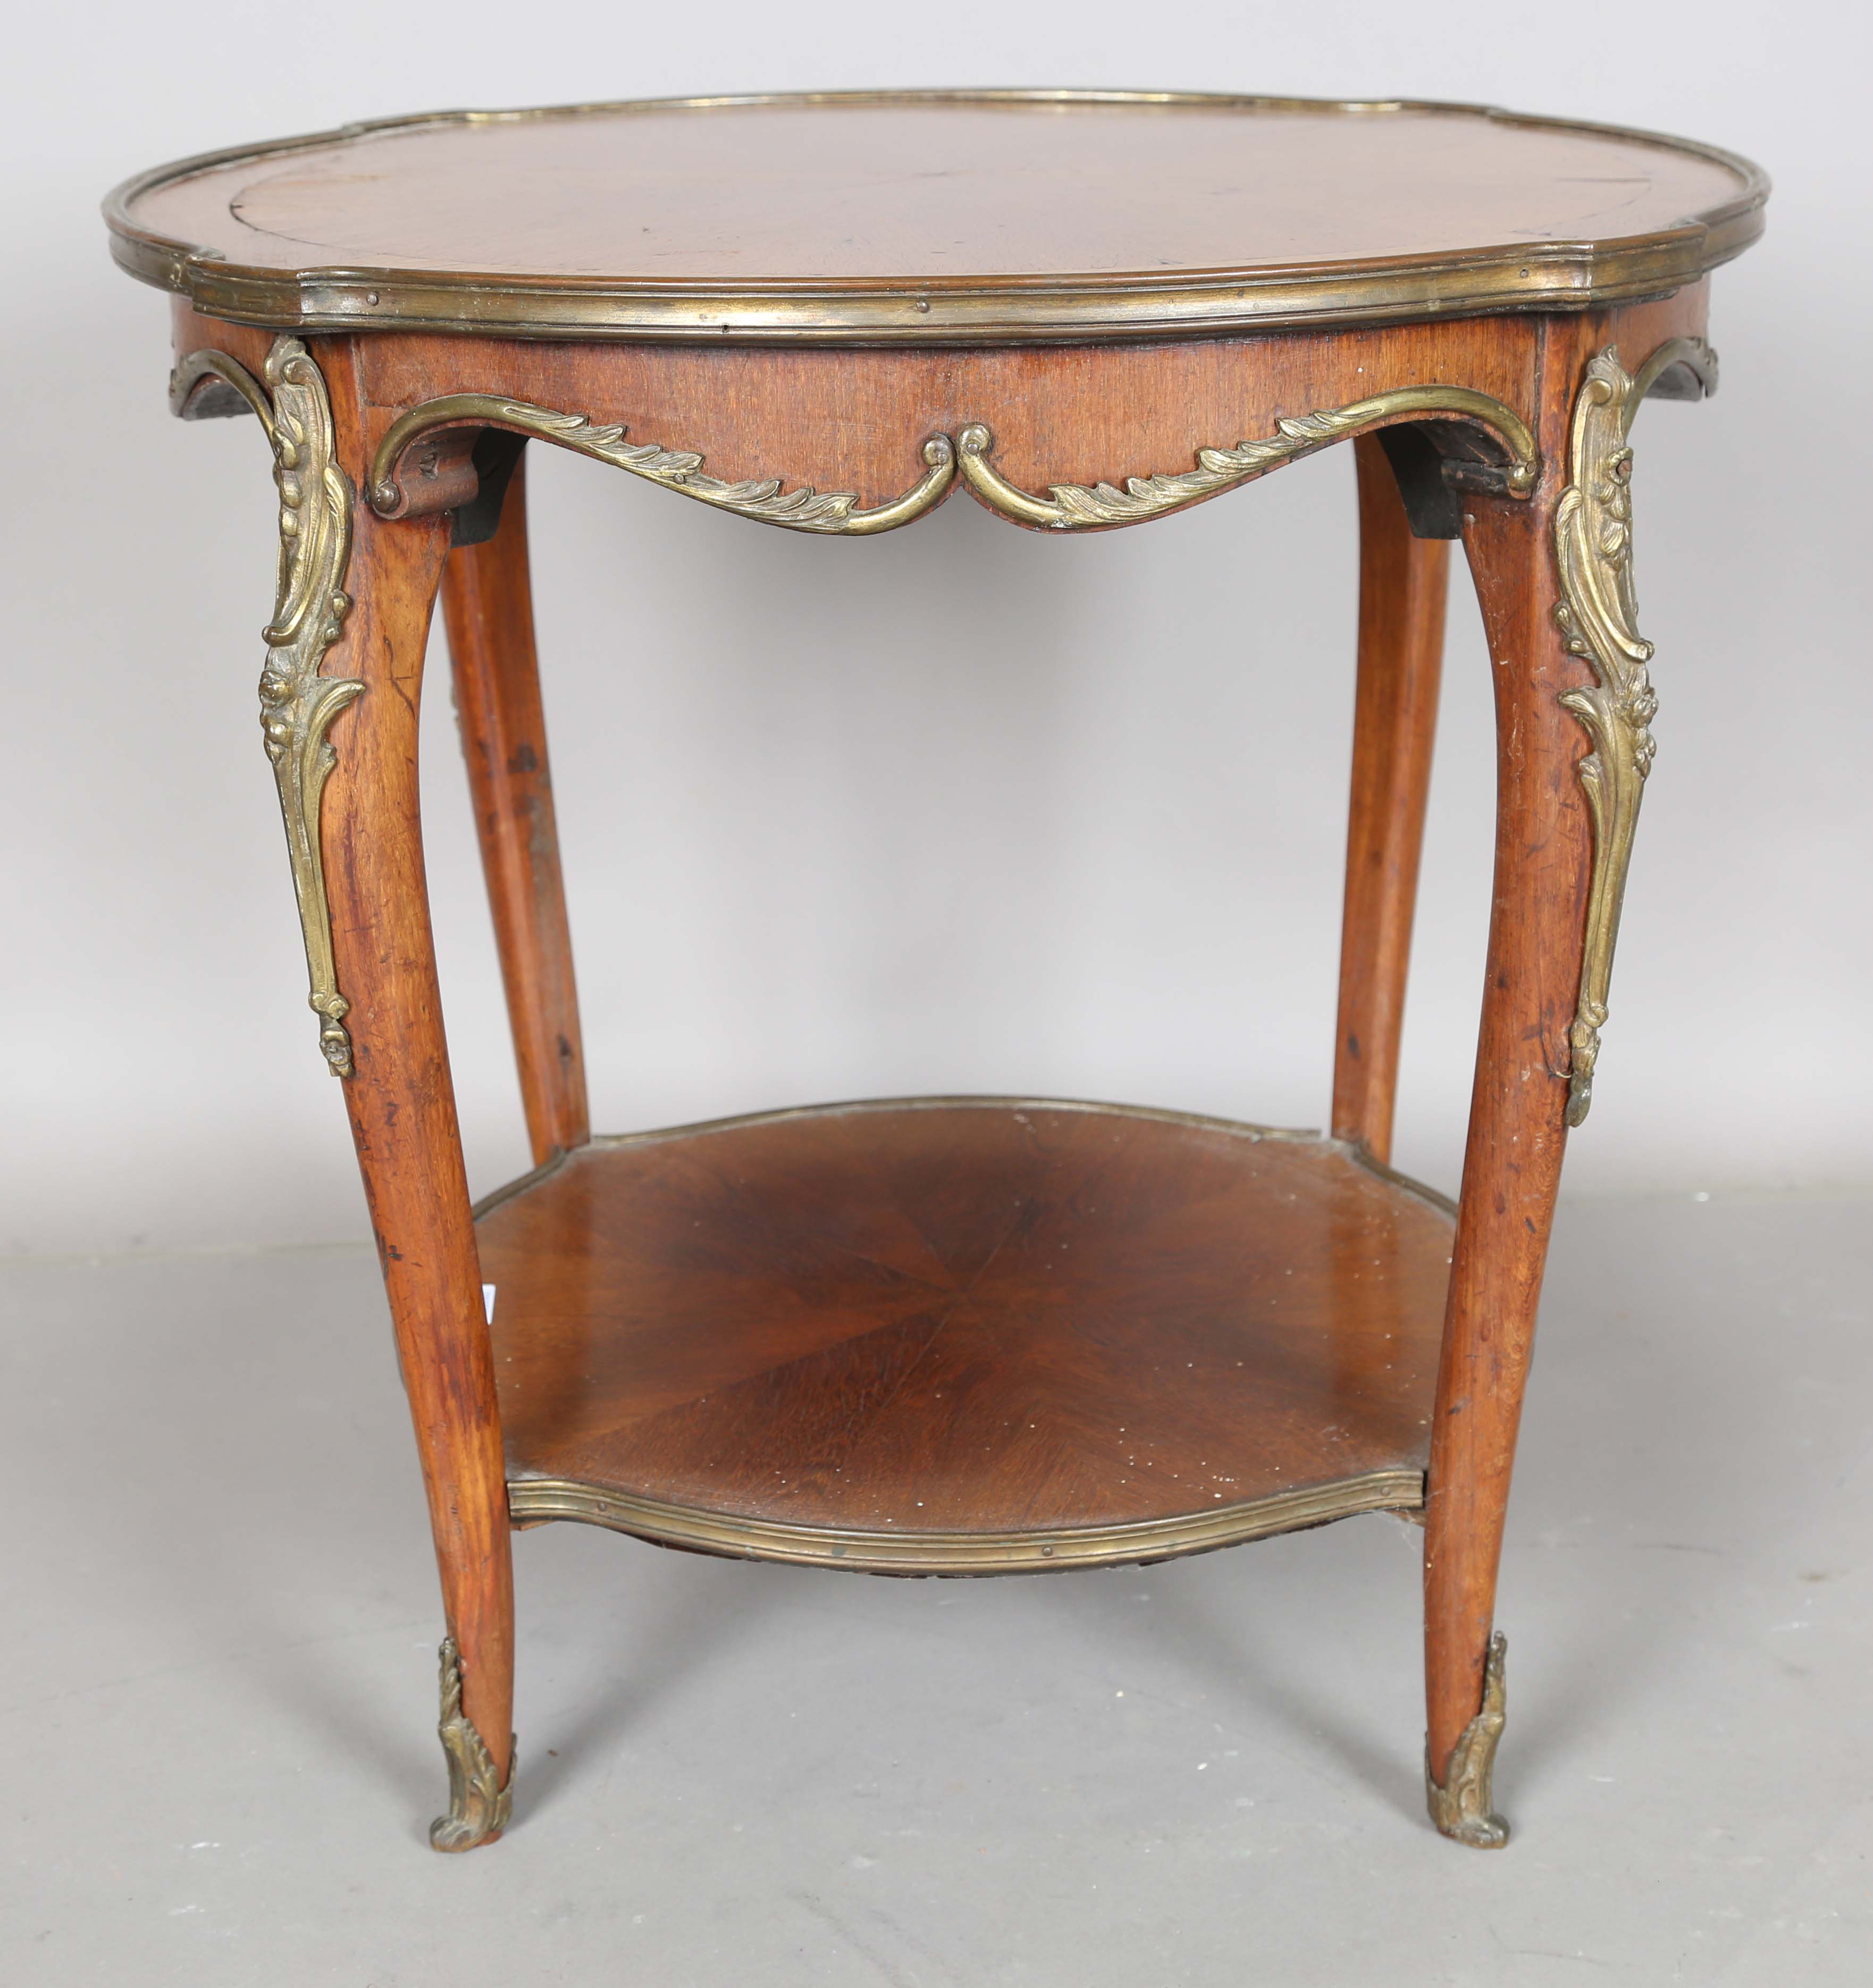 An early 20th century French walnut two-tier occasional table with radial veneers and gilt metal - Image 2 of 11